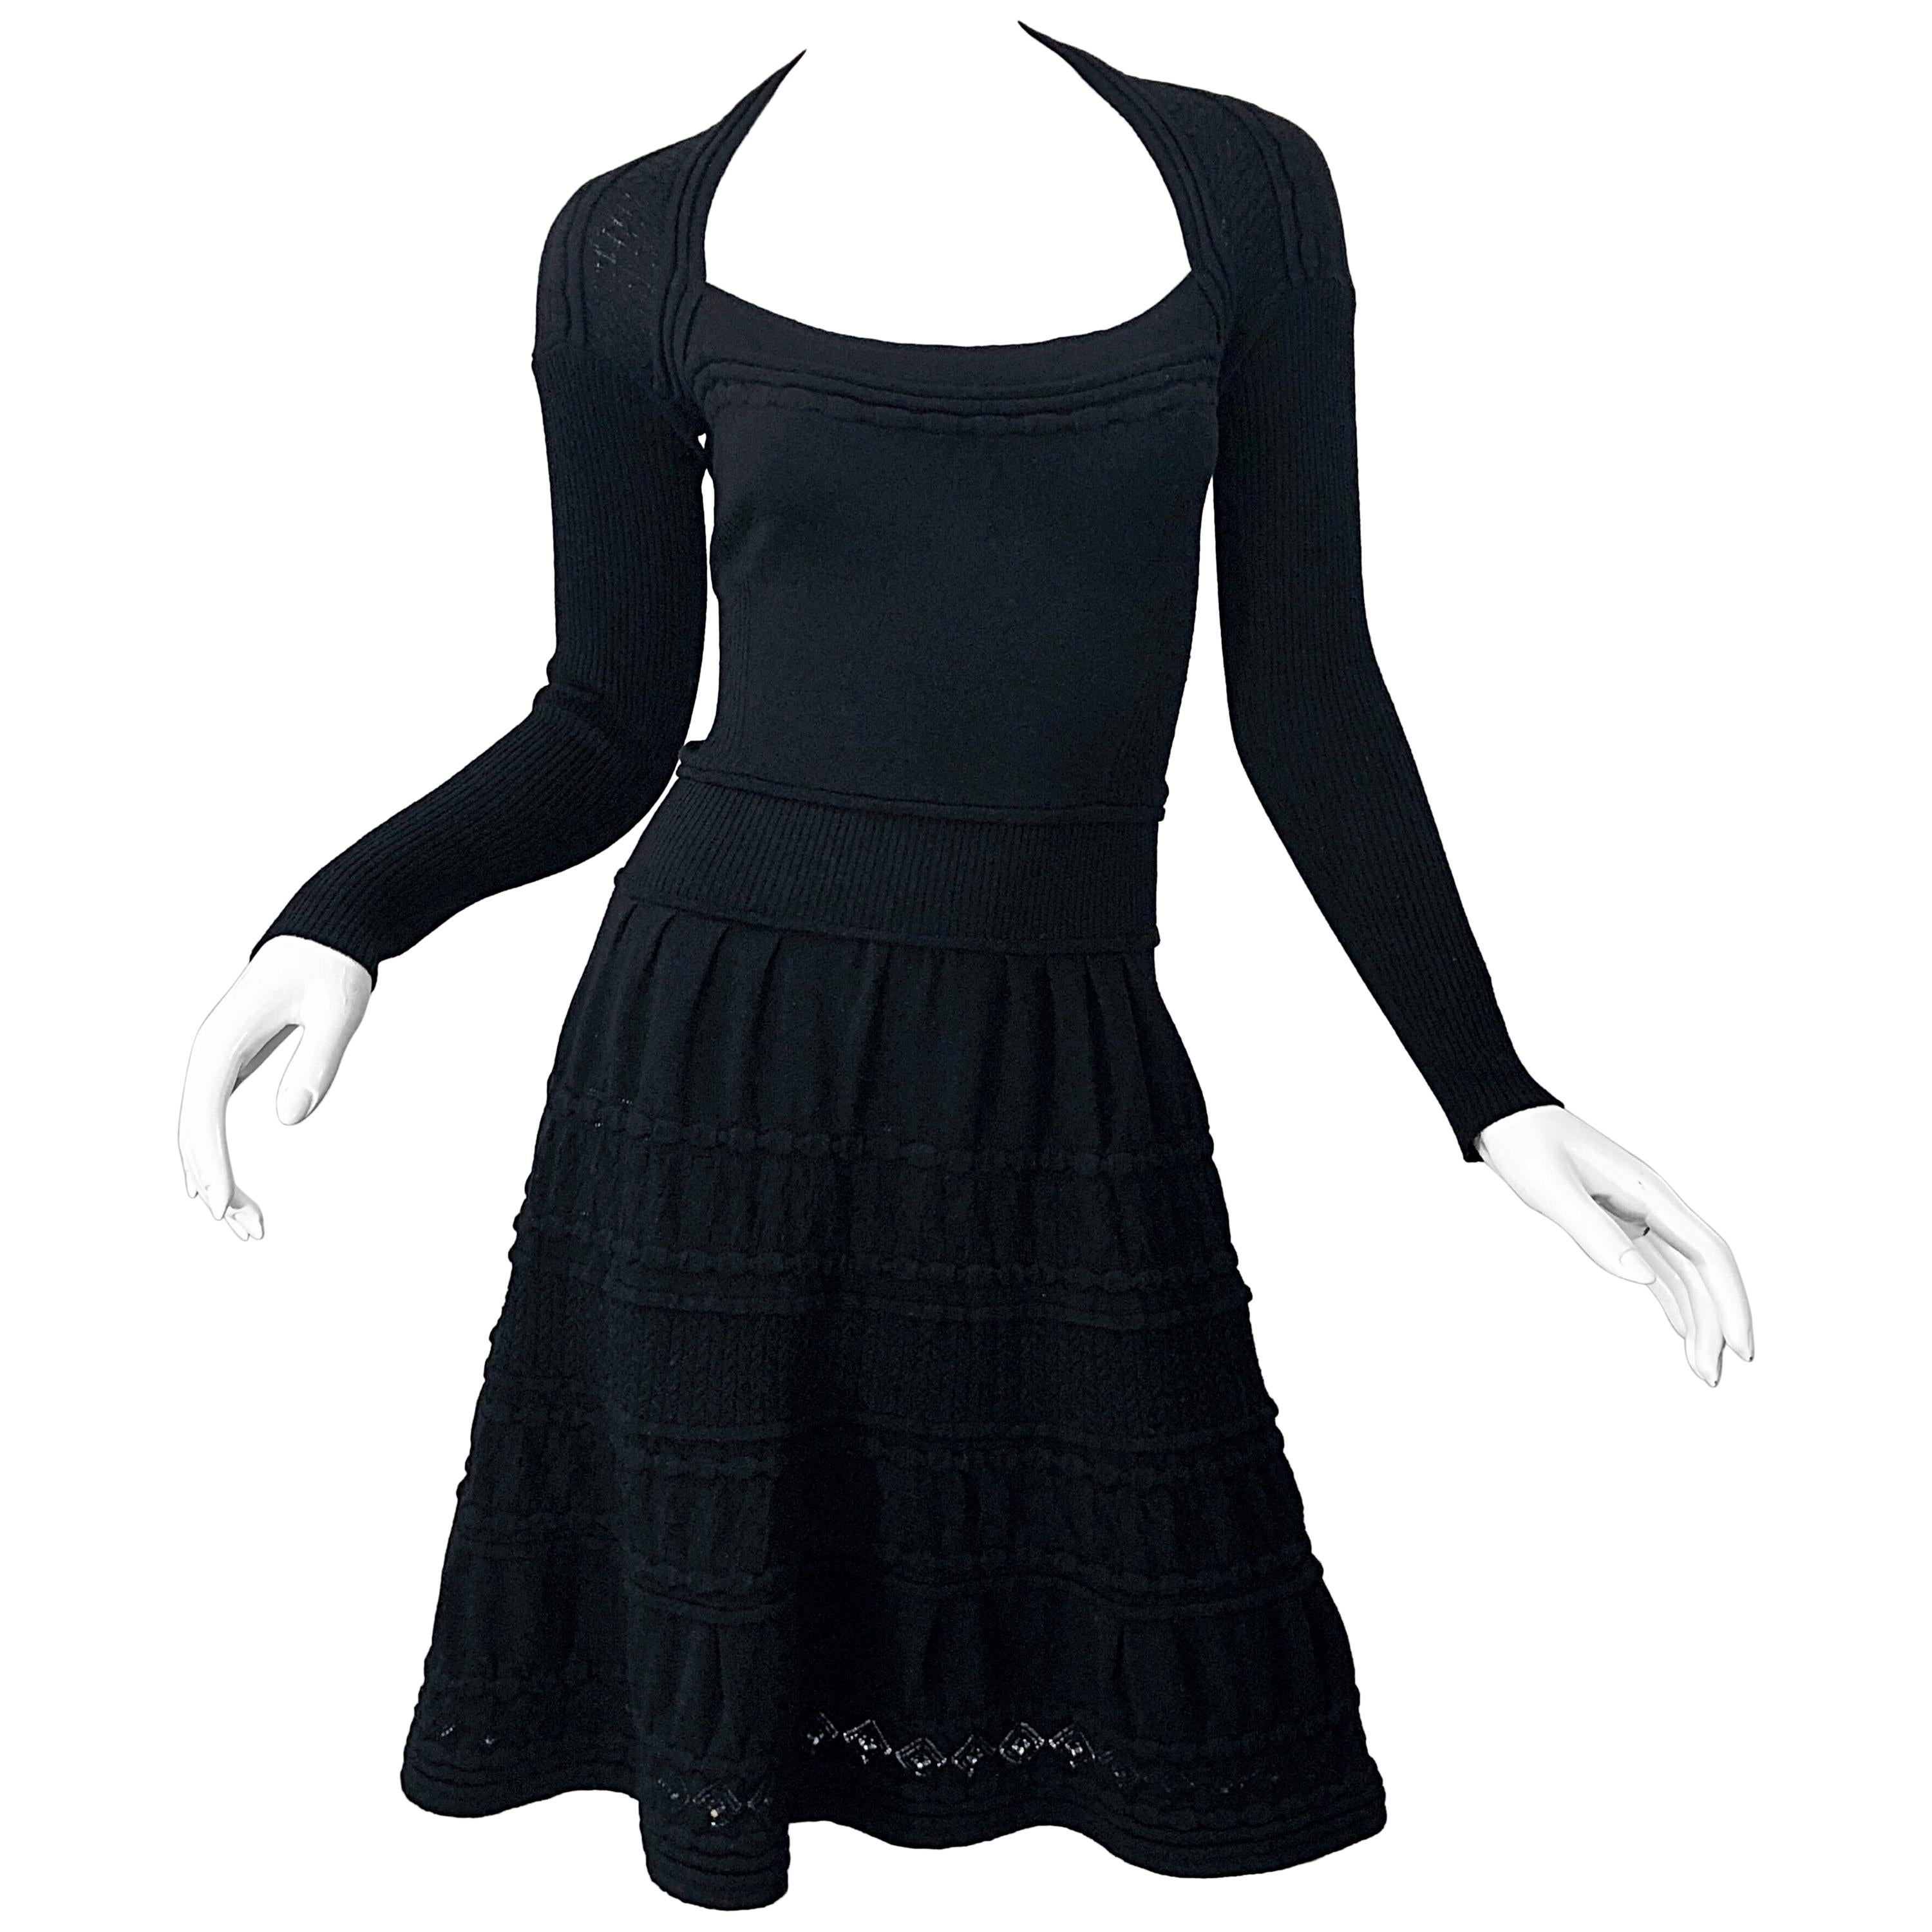 New w/ Tags D. Exterior Italian Made Black Lightweight Wool Knit Skater Dress For Sale